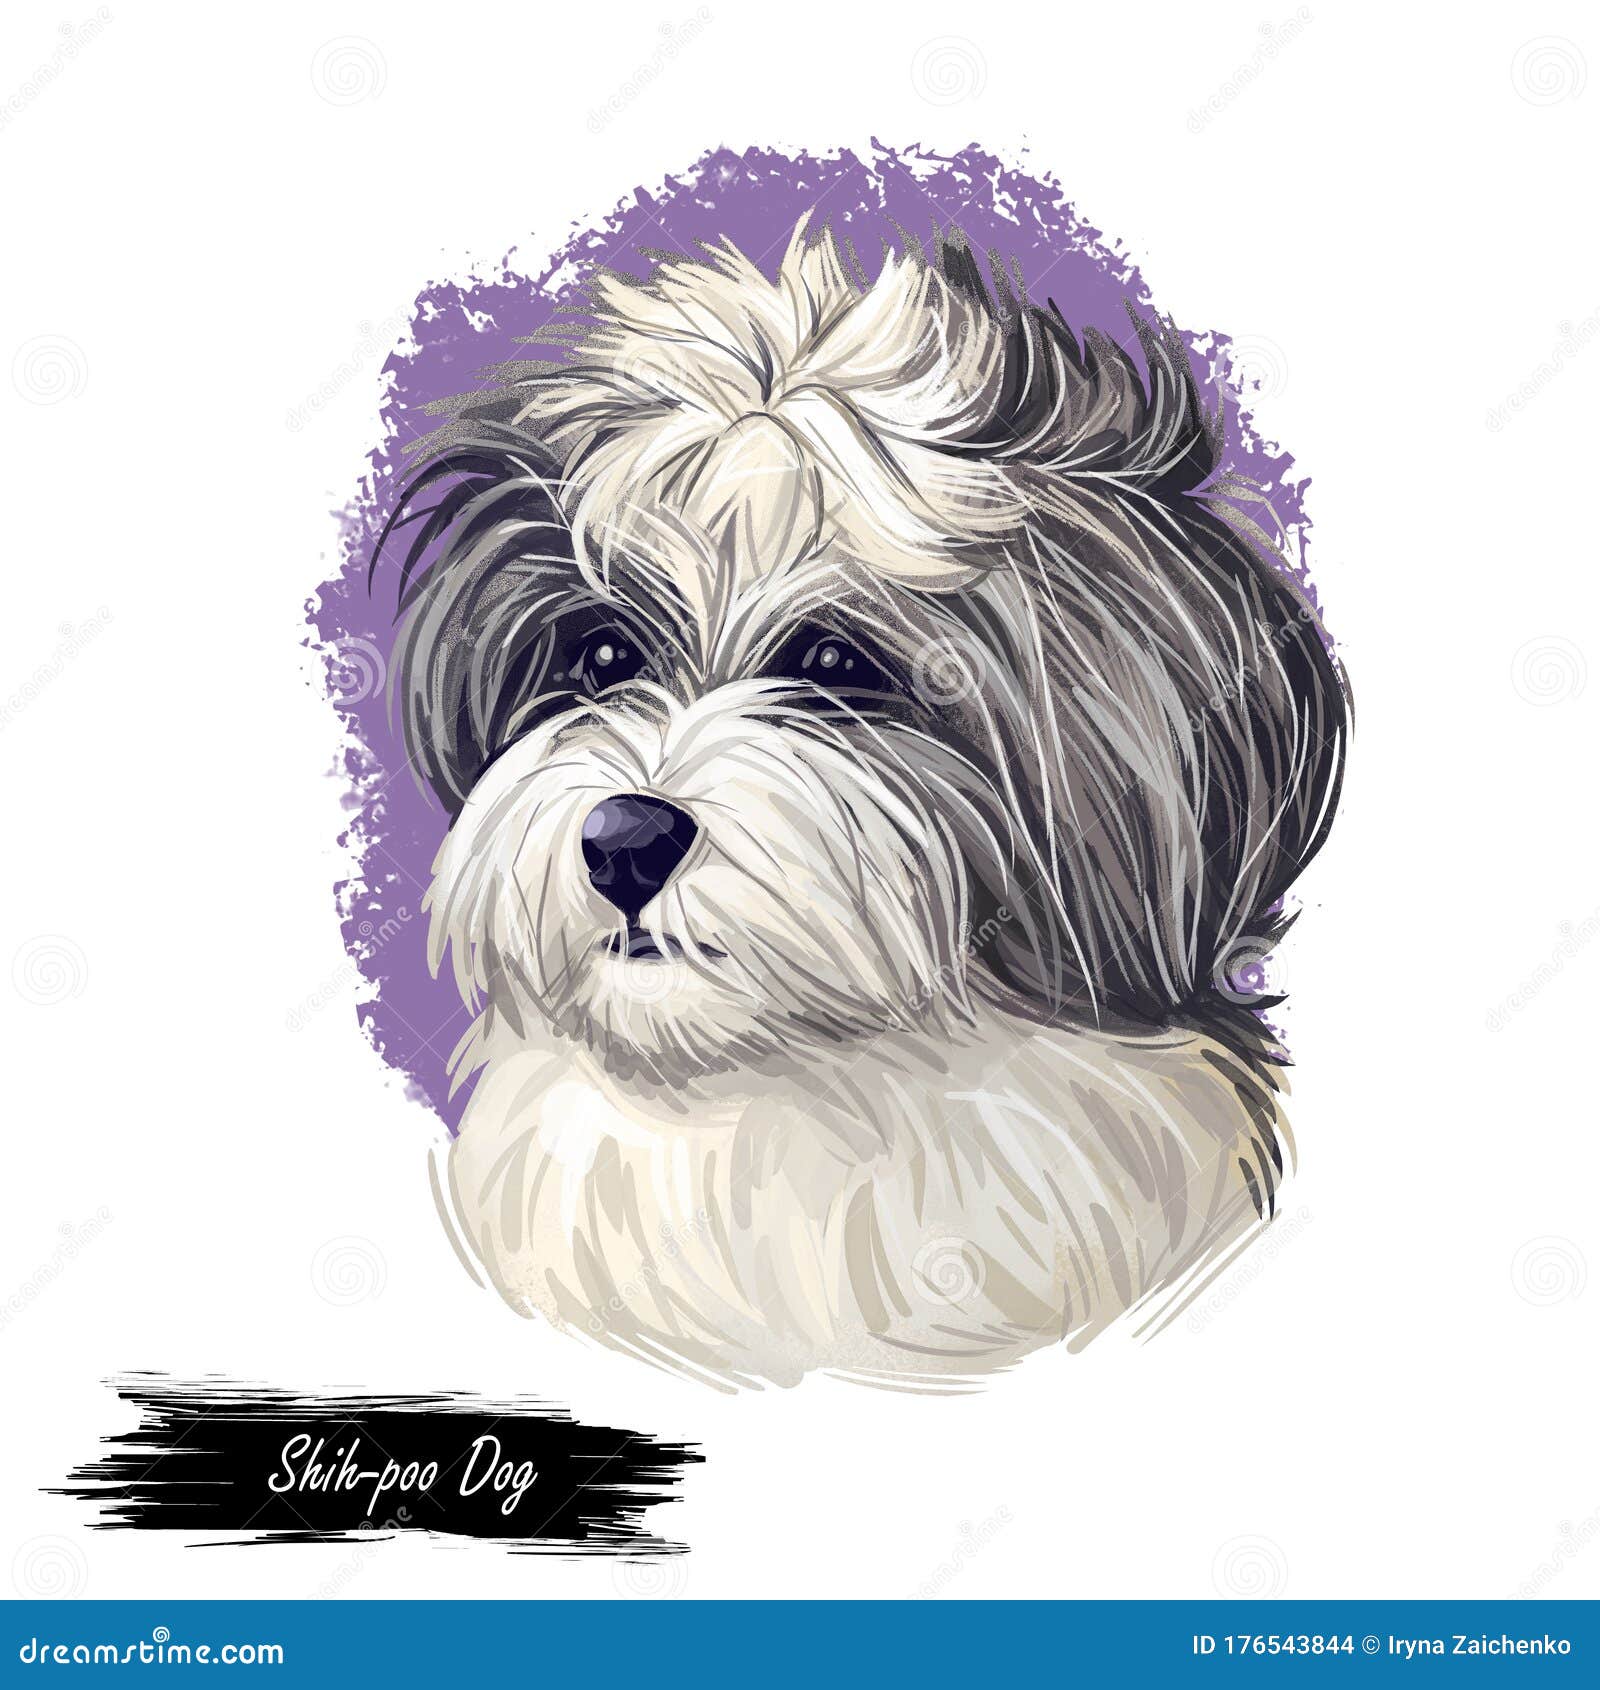 Shihpoo Dog Cross Breed Of Shih Tzu And Poodle Isolated